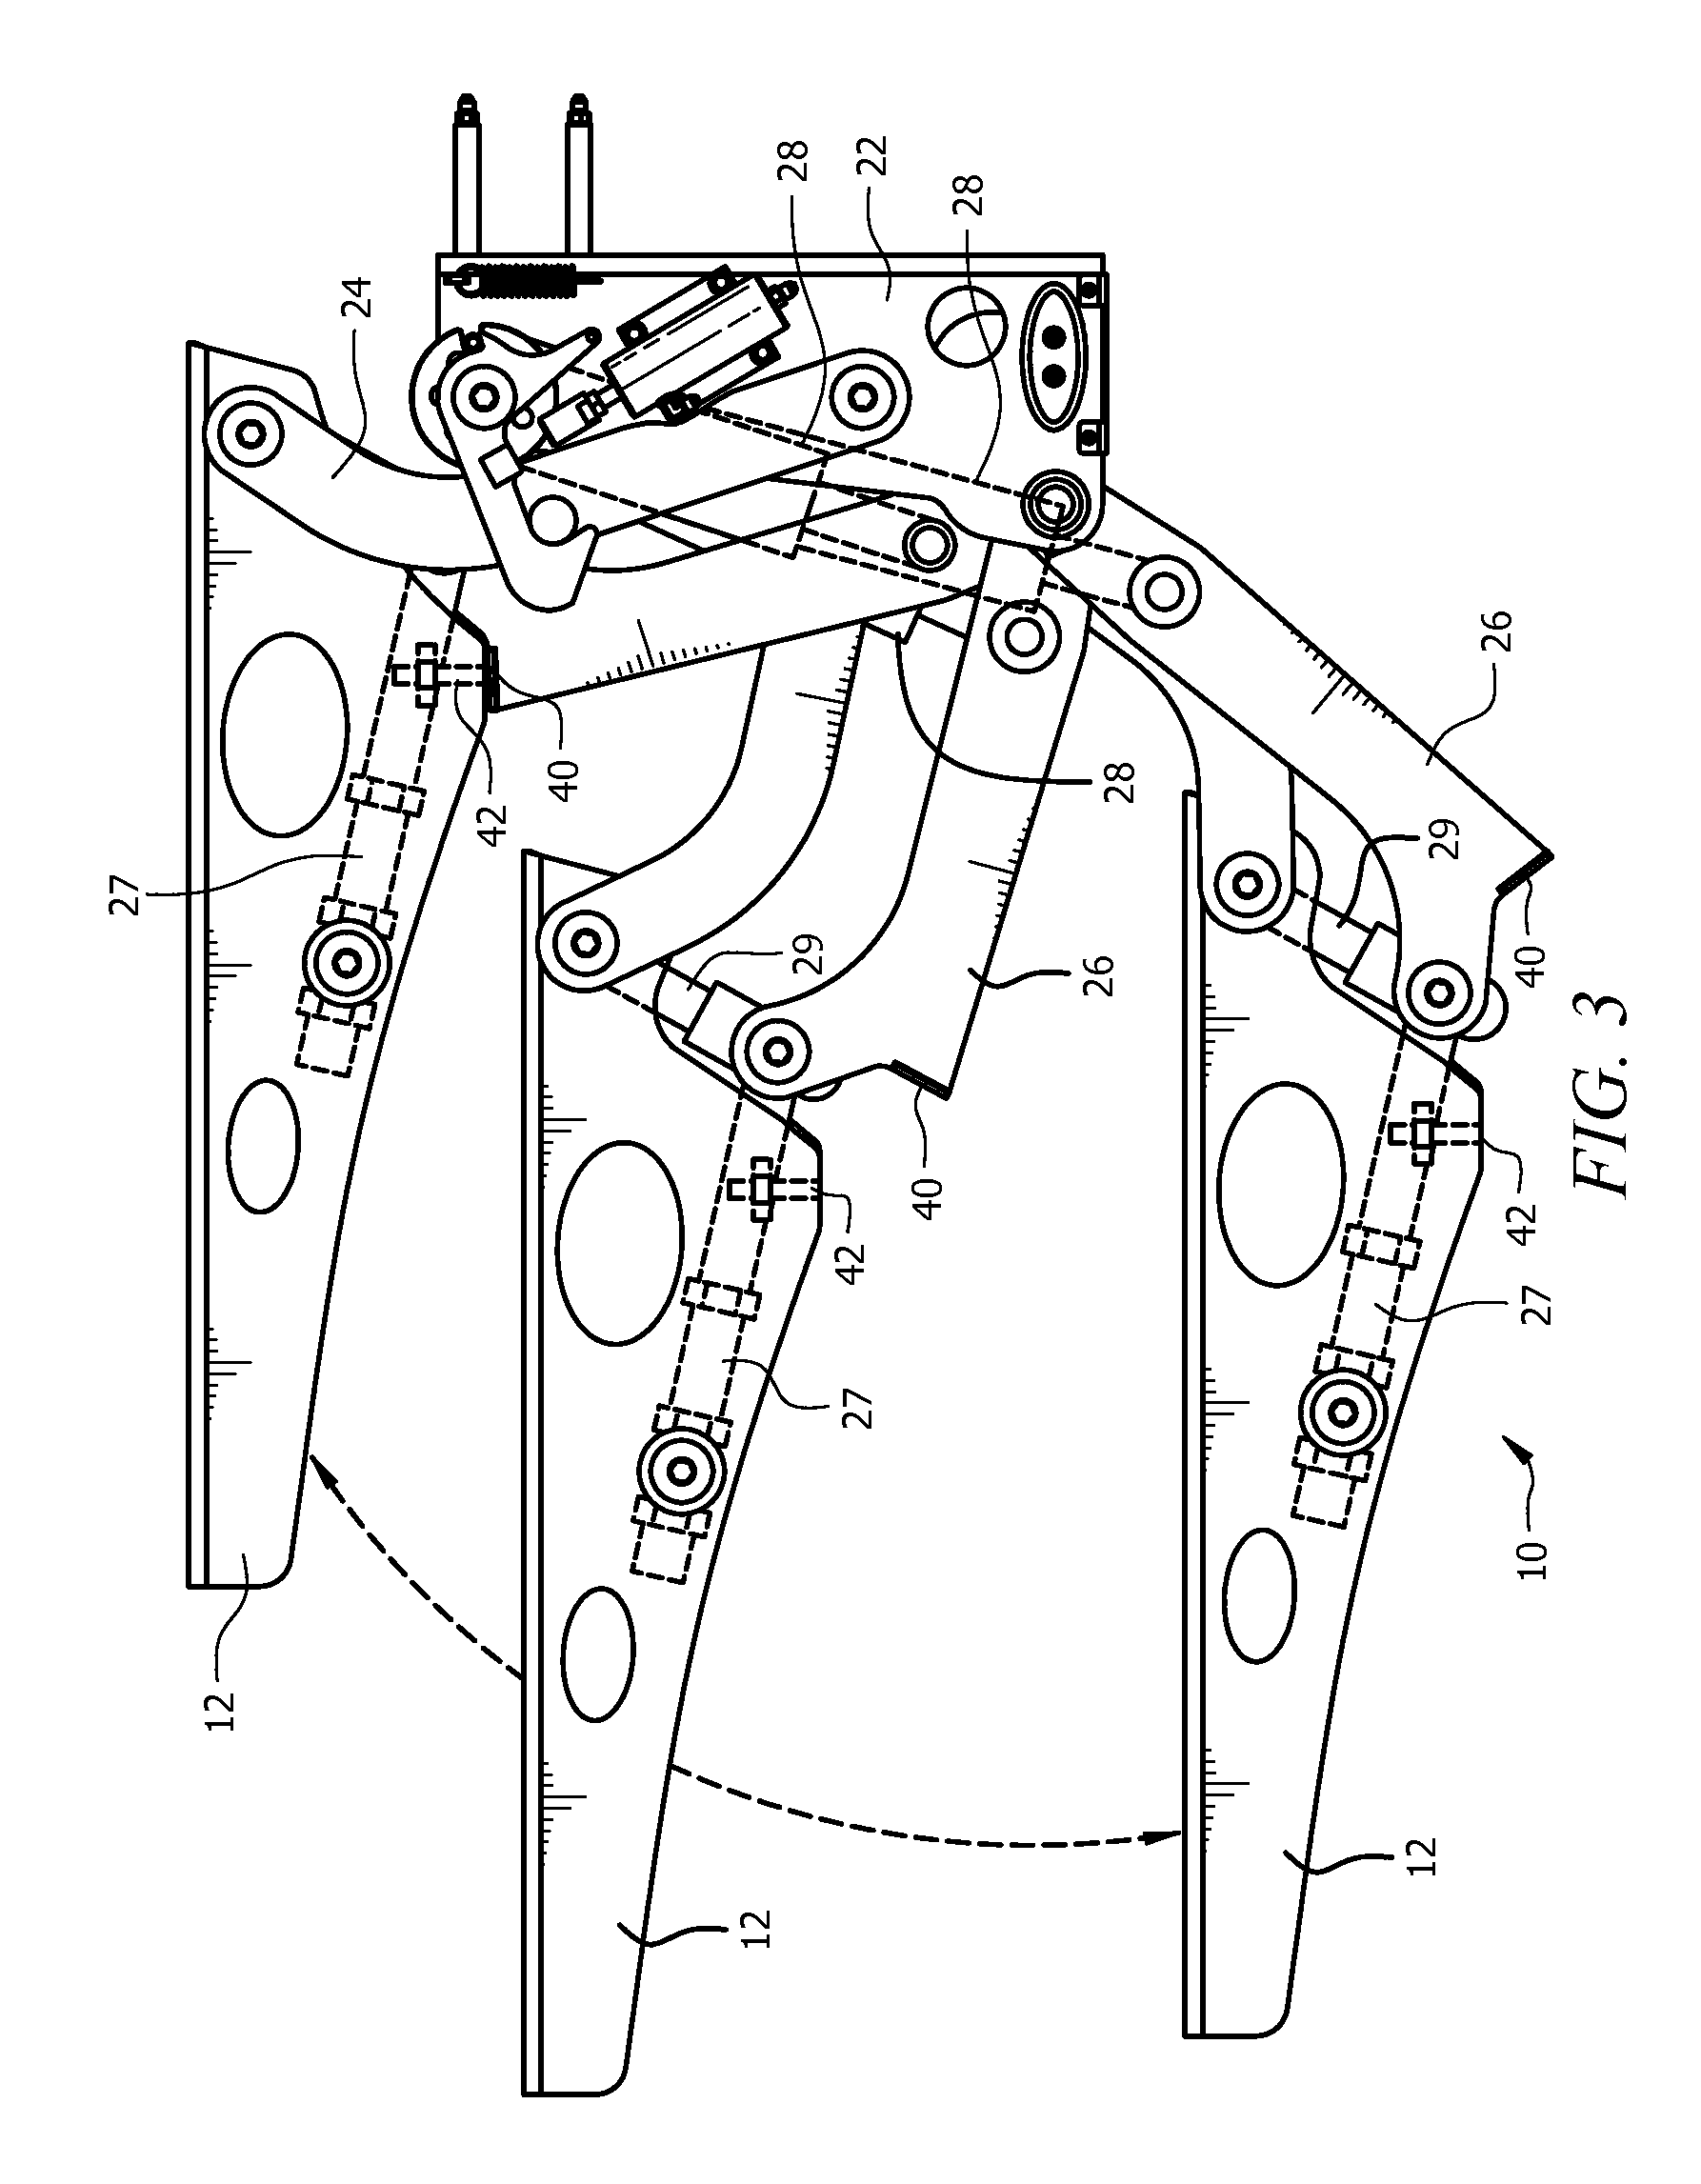 Lift mechanism for lifting a swim platform above and over a rear deck of a boat